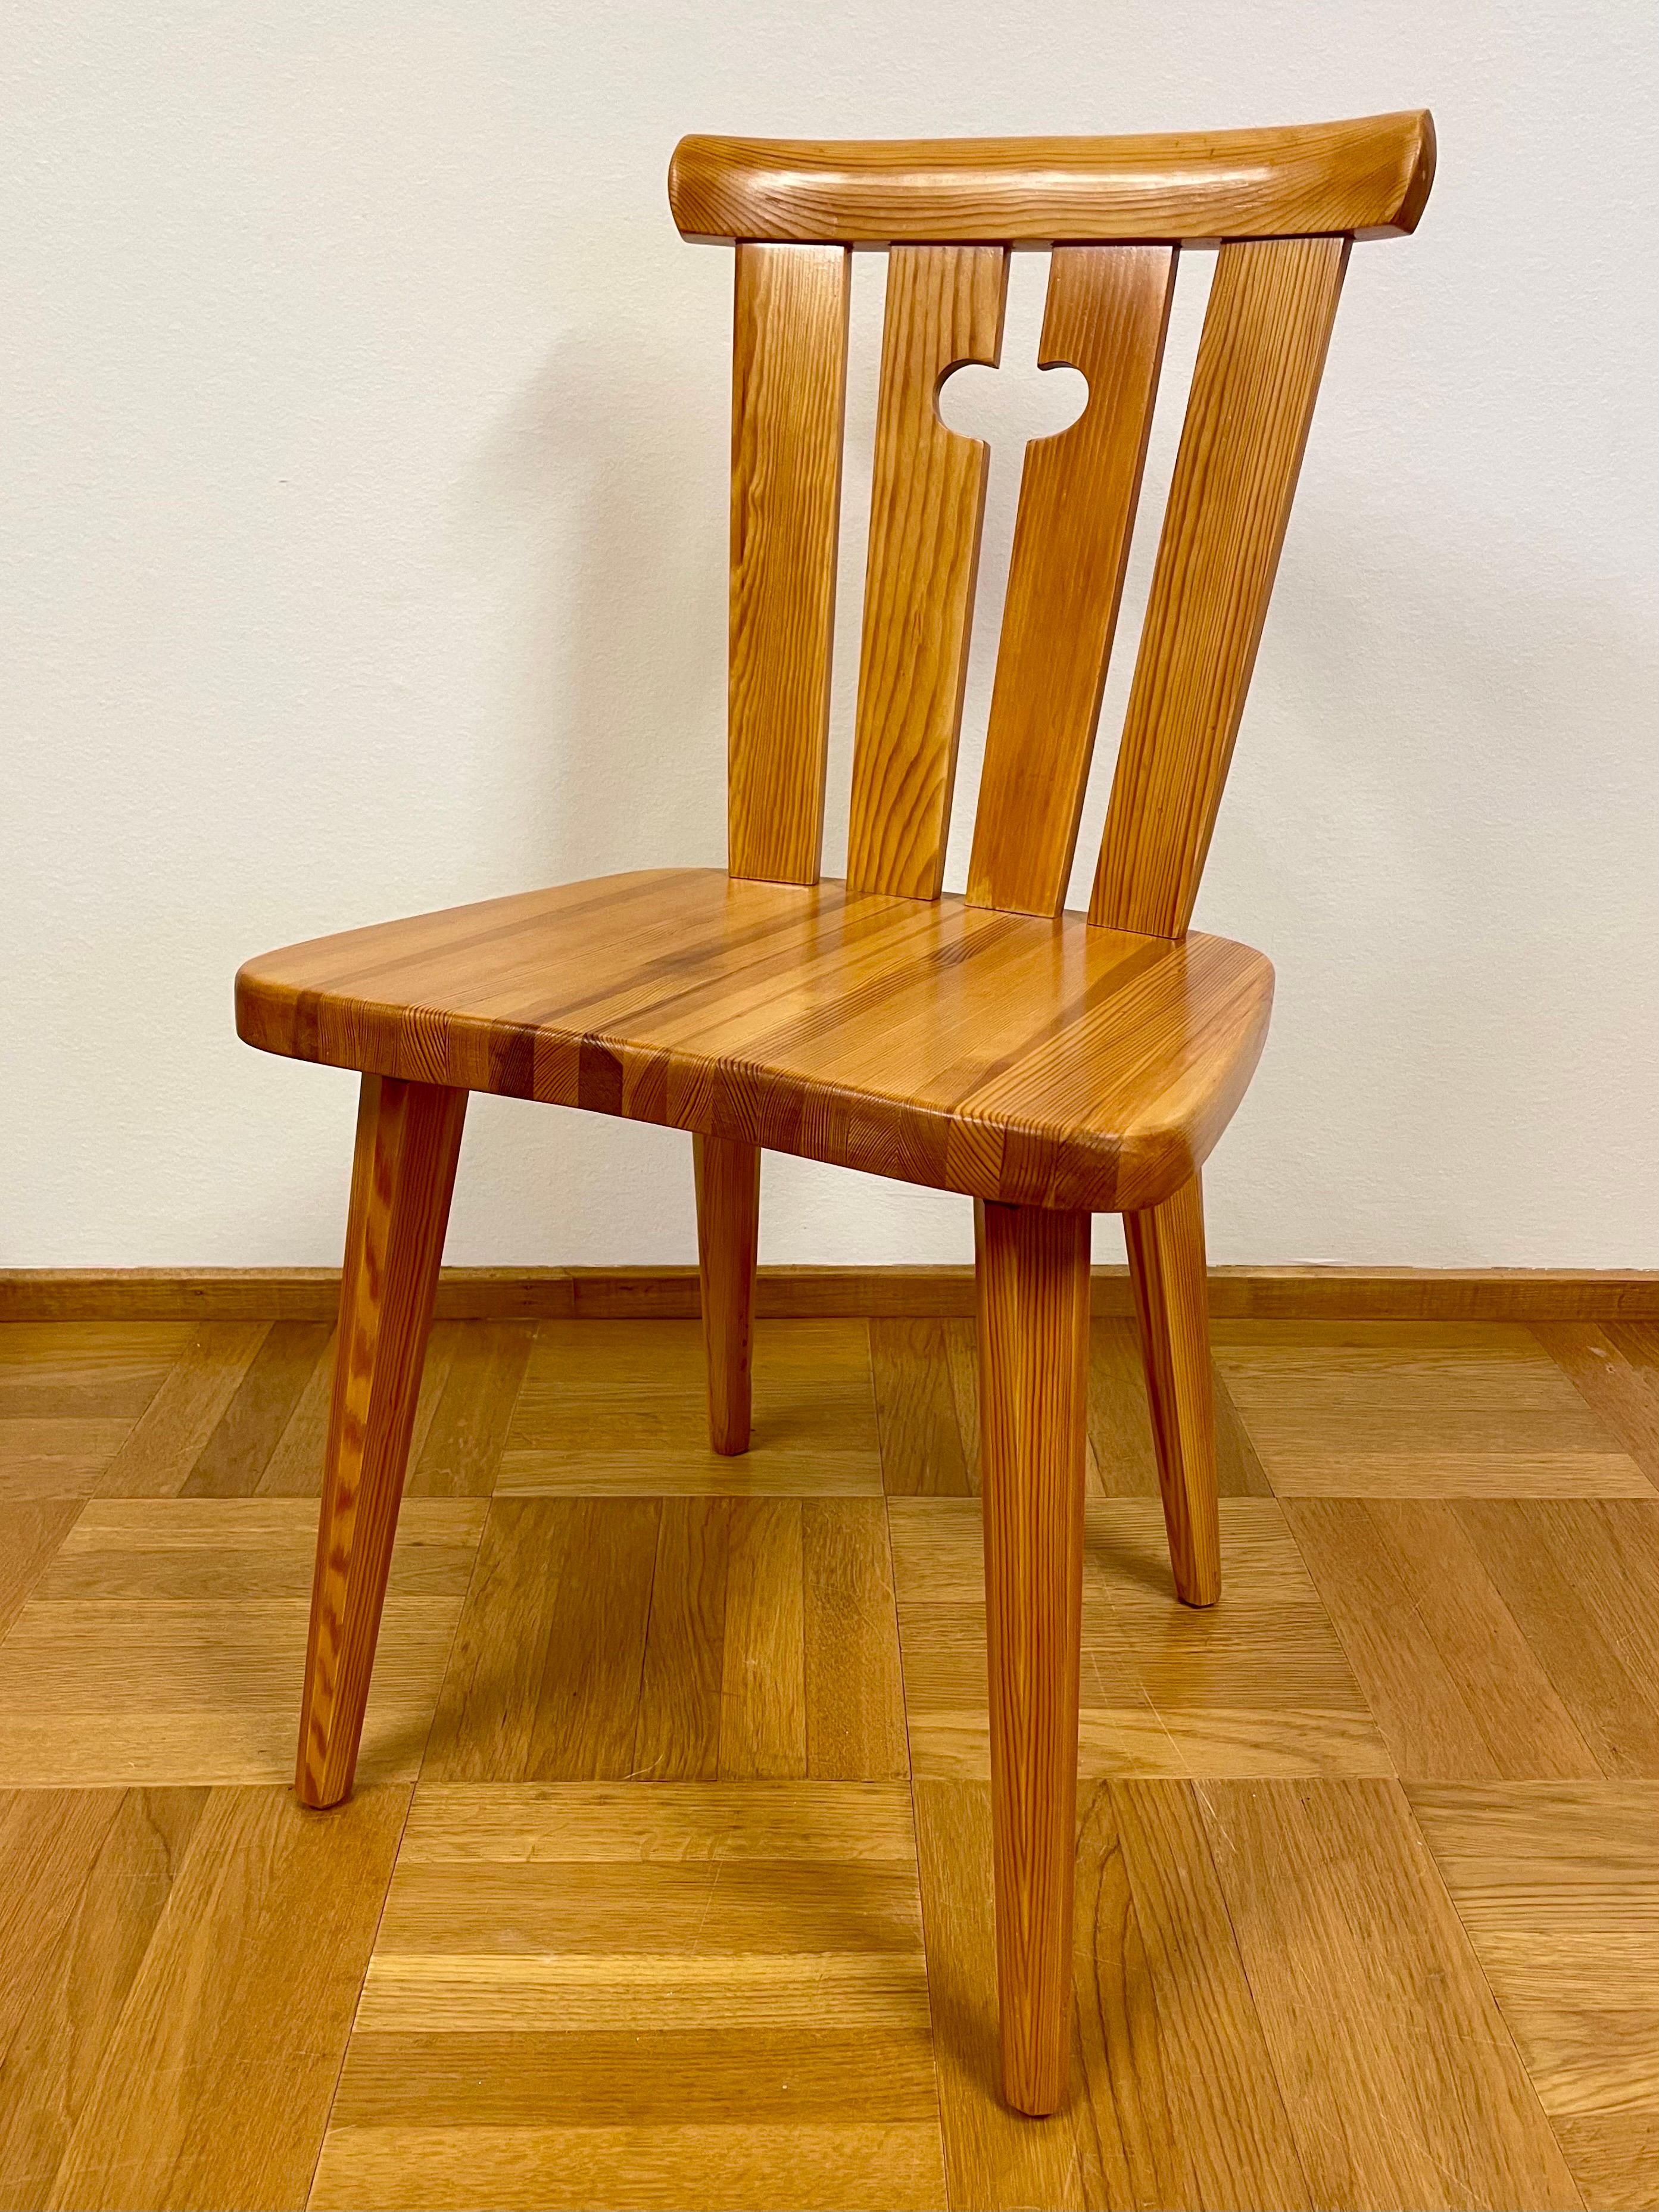 Swedish Mid 20th Pine Chairs Set by Göran Malmvall for Karl Andersson & Söner In Good Condition For Sale In Örebro, SE